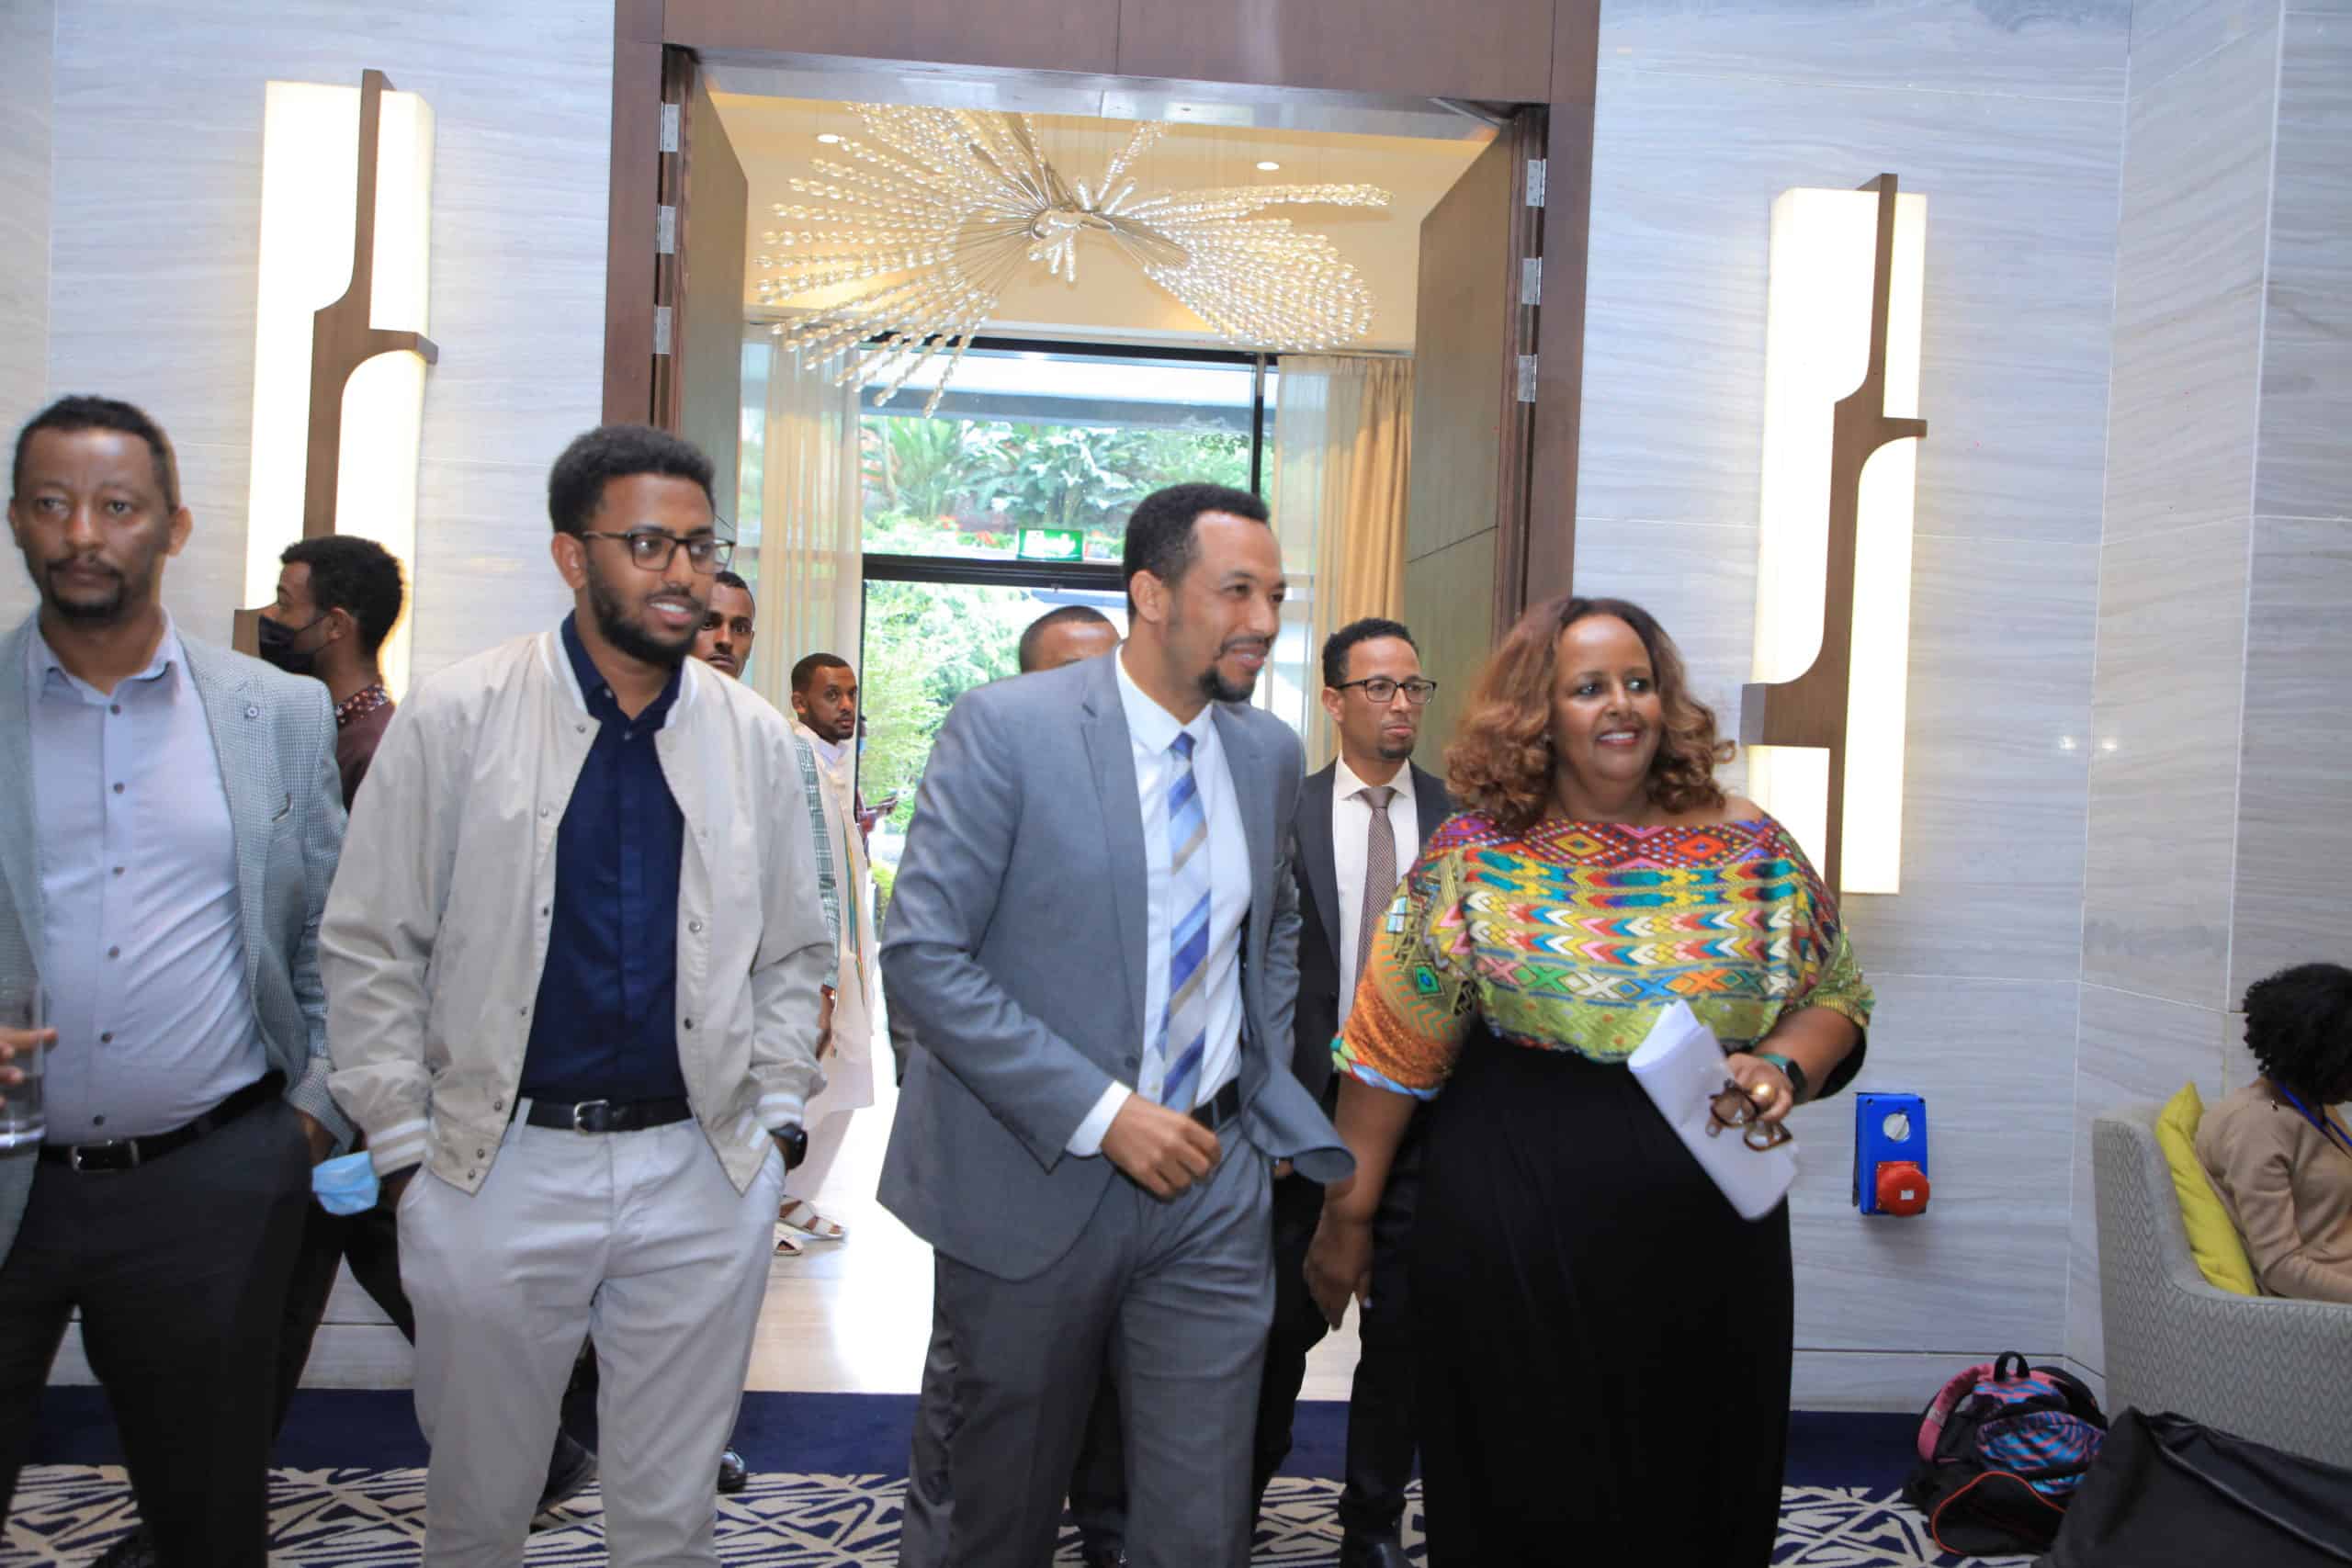 Former L10K Project Director Wuleta Betemariam welcomes H.E. Dr. Dereje Duguma, State Minister of Health, to the evening reception and photo book launch.